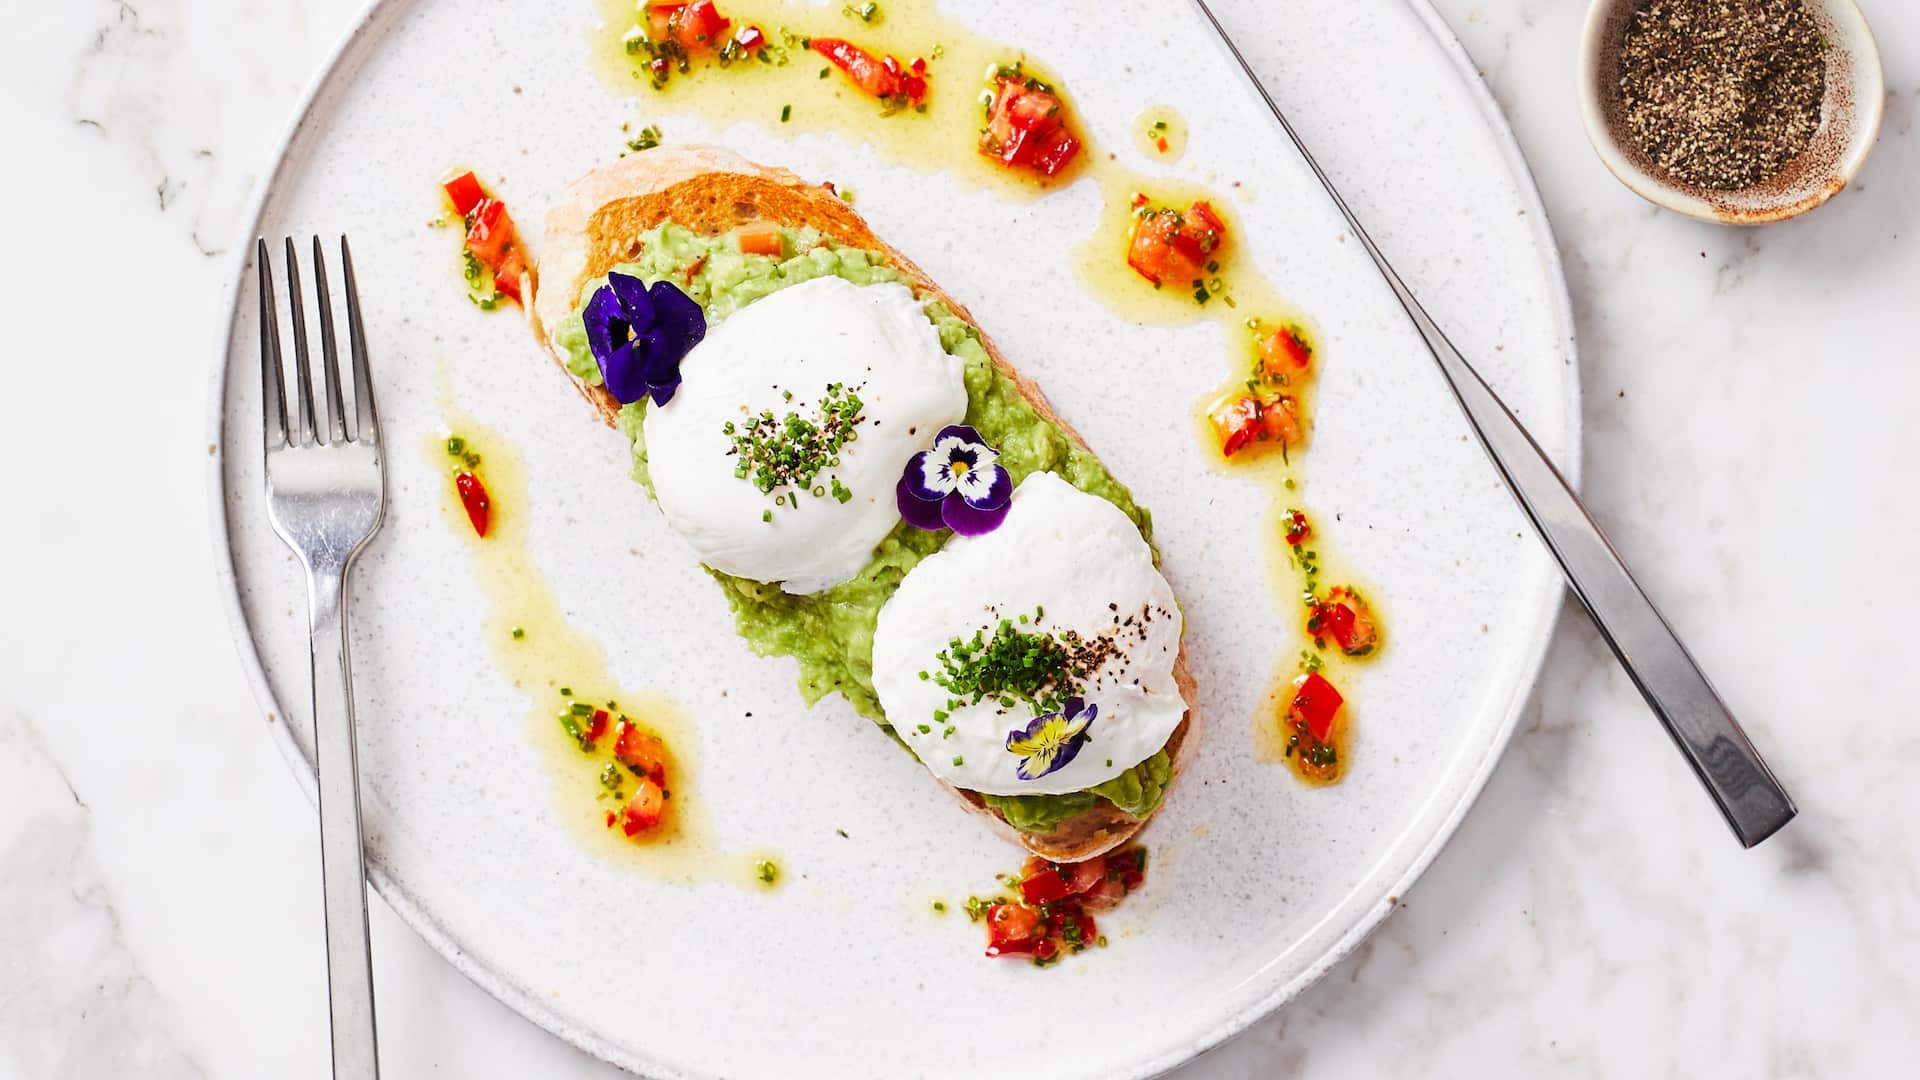 Poached eggs with colourful plate decor